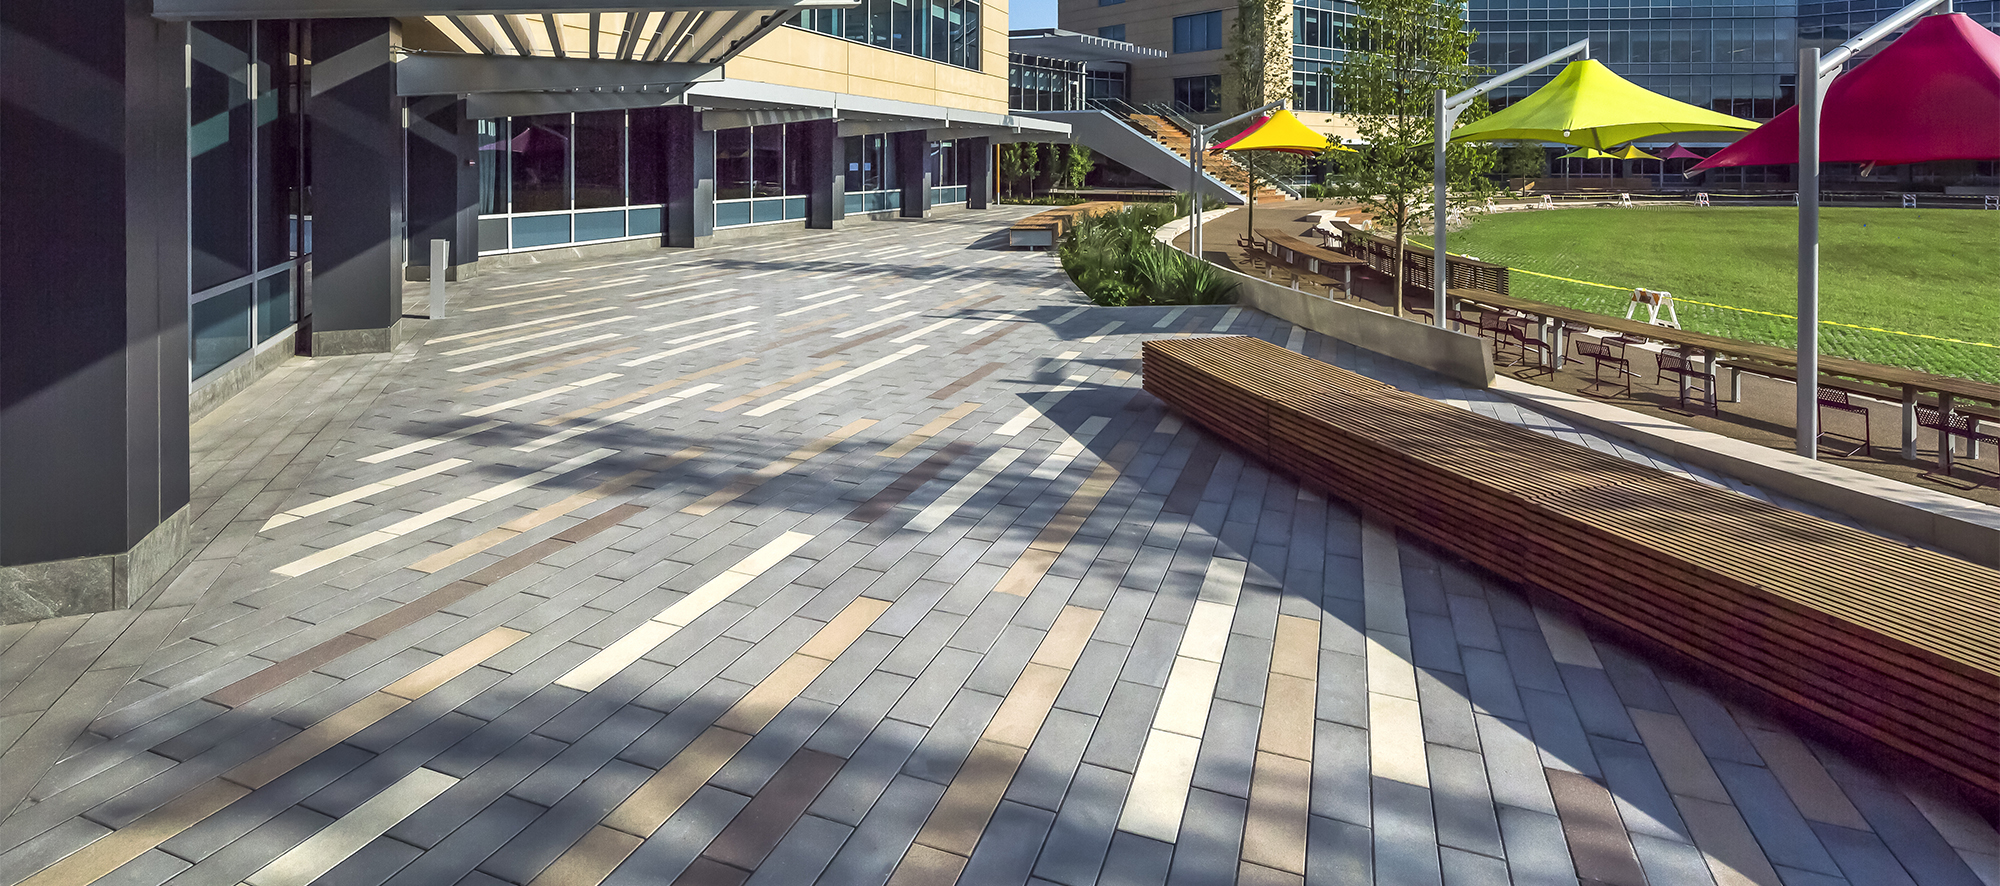 Promenade Planks in four unique colors give the impression of shooting stars along the front of the building, with subtle benches for rest.